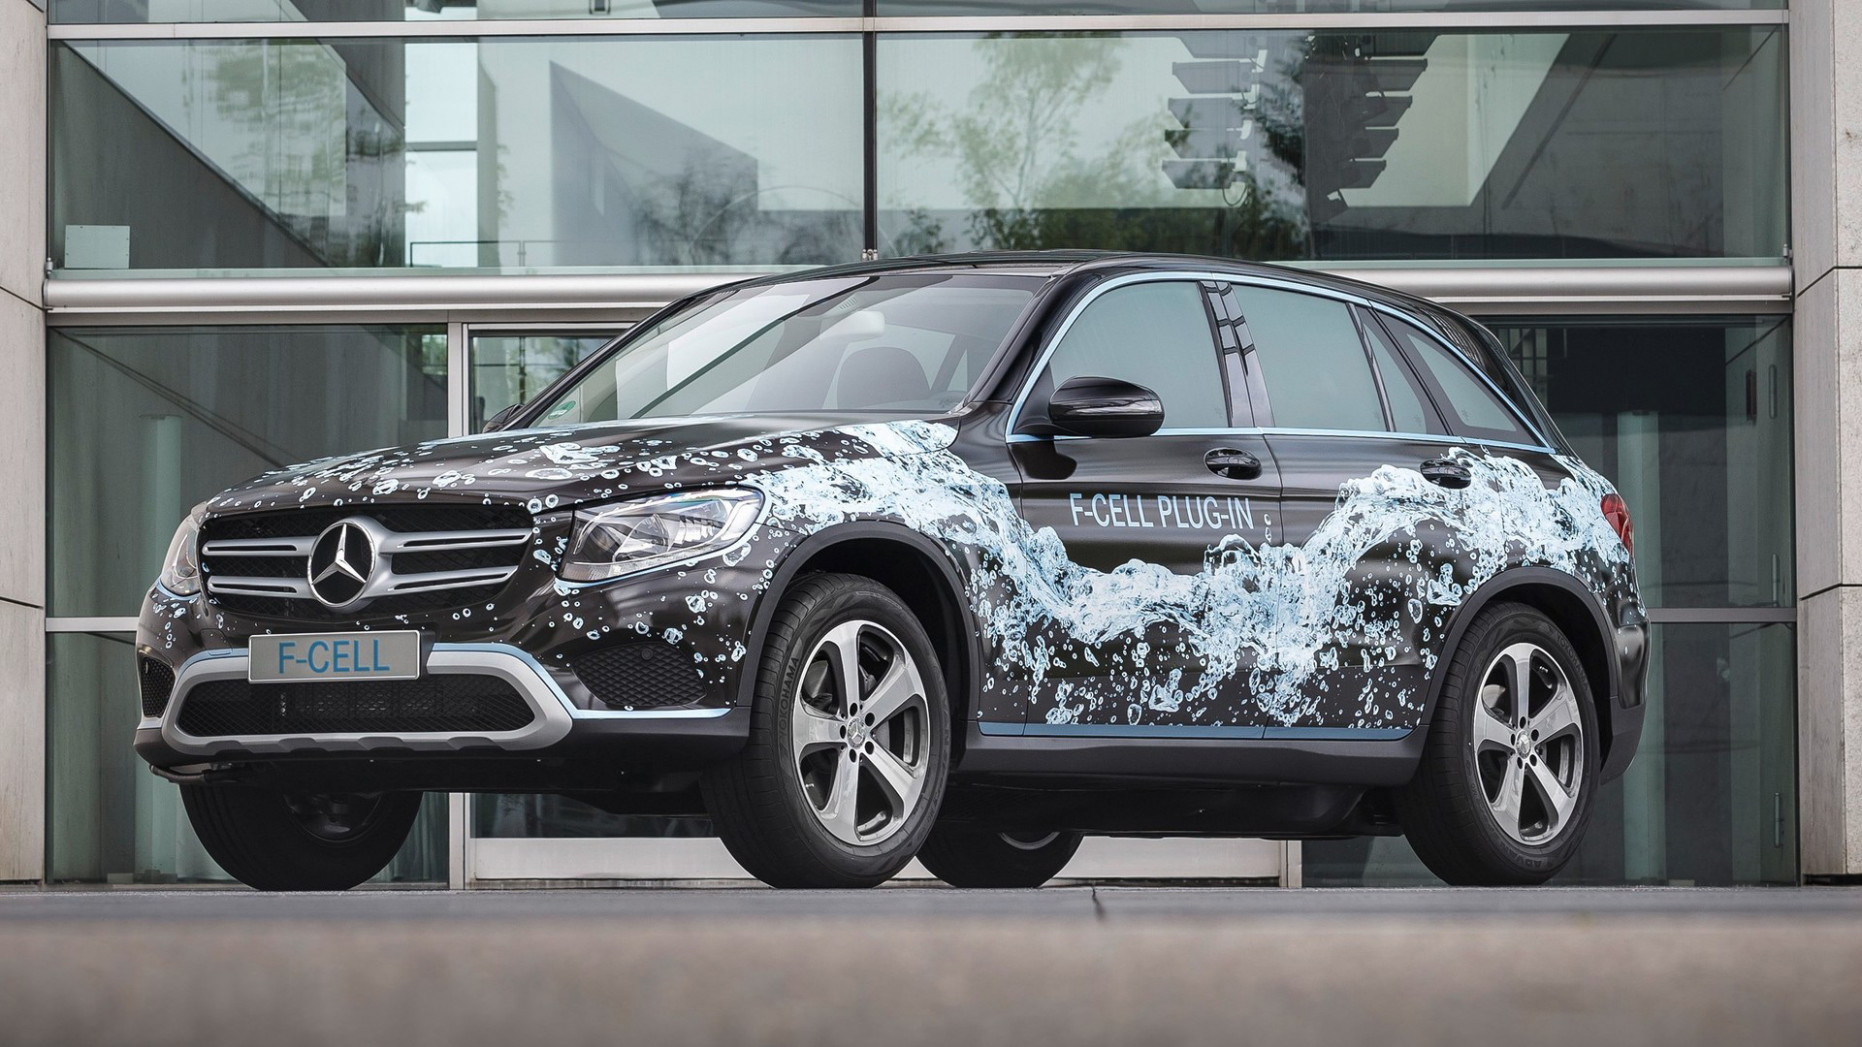 Mercedes-Benz GLC to offer world's first plug-in fuel-cell powertrain